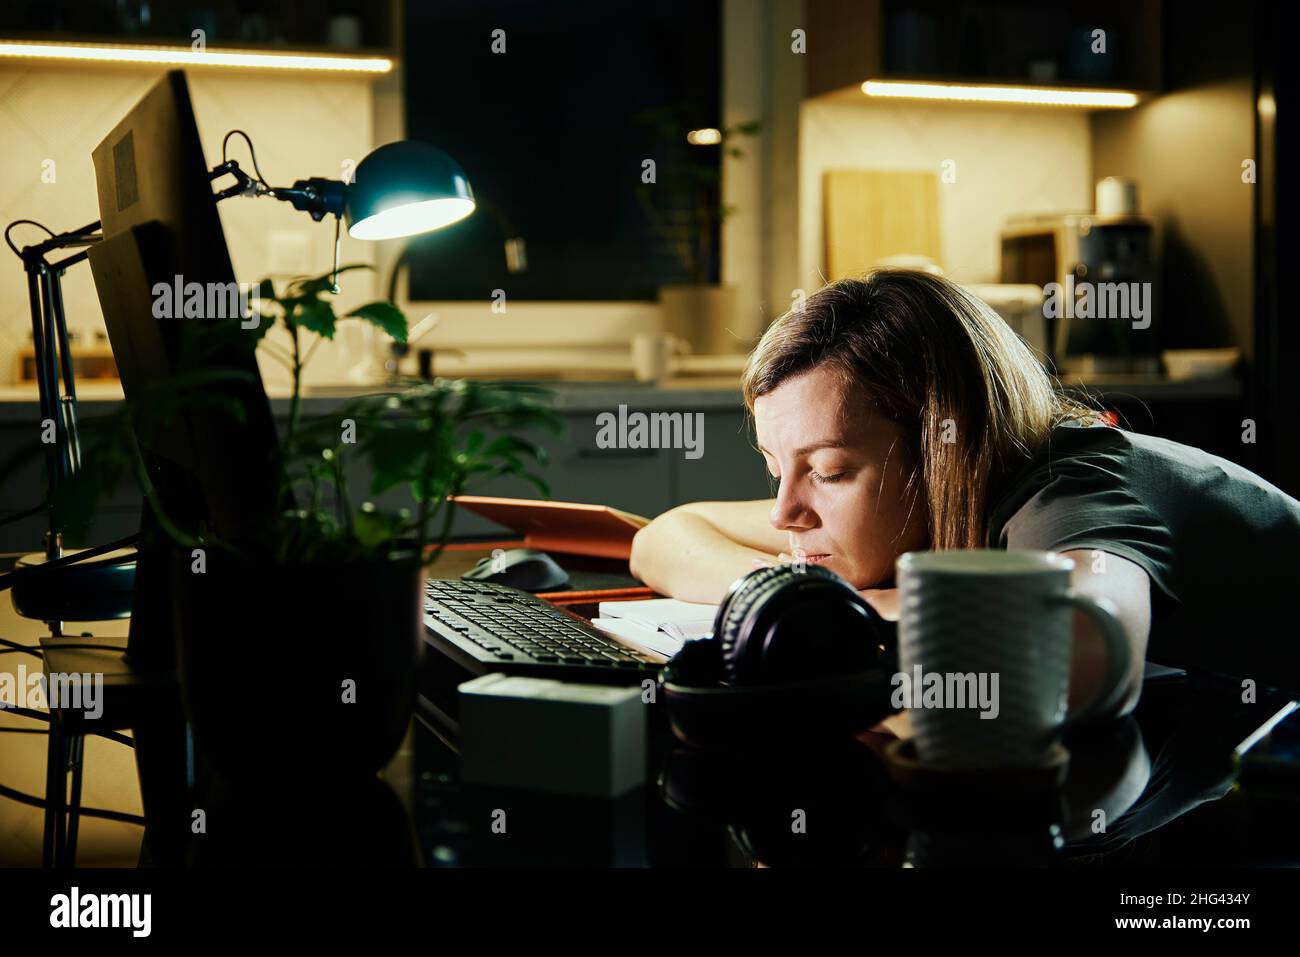 Tired woman works from home use computer at night, overwork burnout, freelancer works remote at home workplace Stock Photo